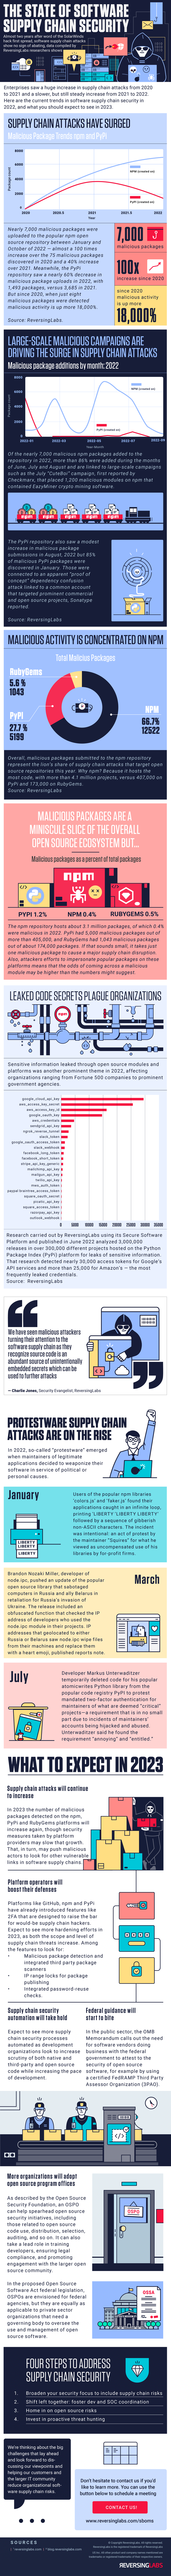 The state of software supply chain security